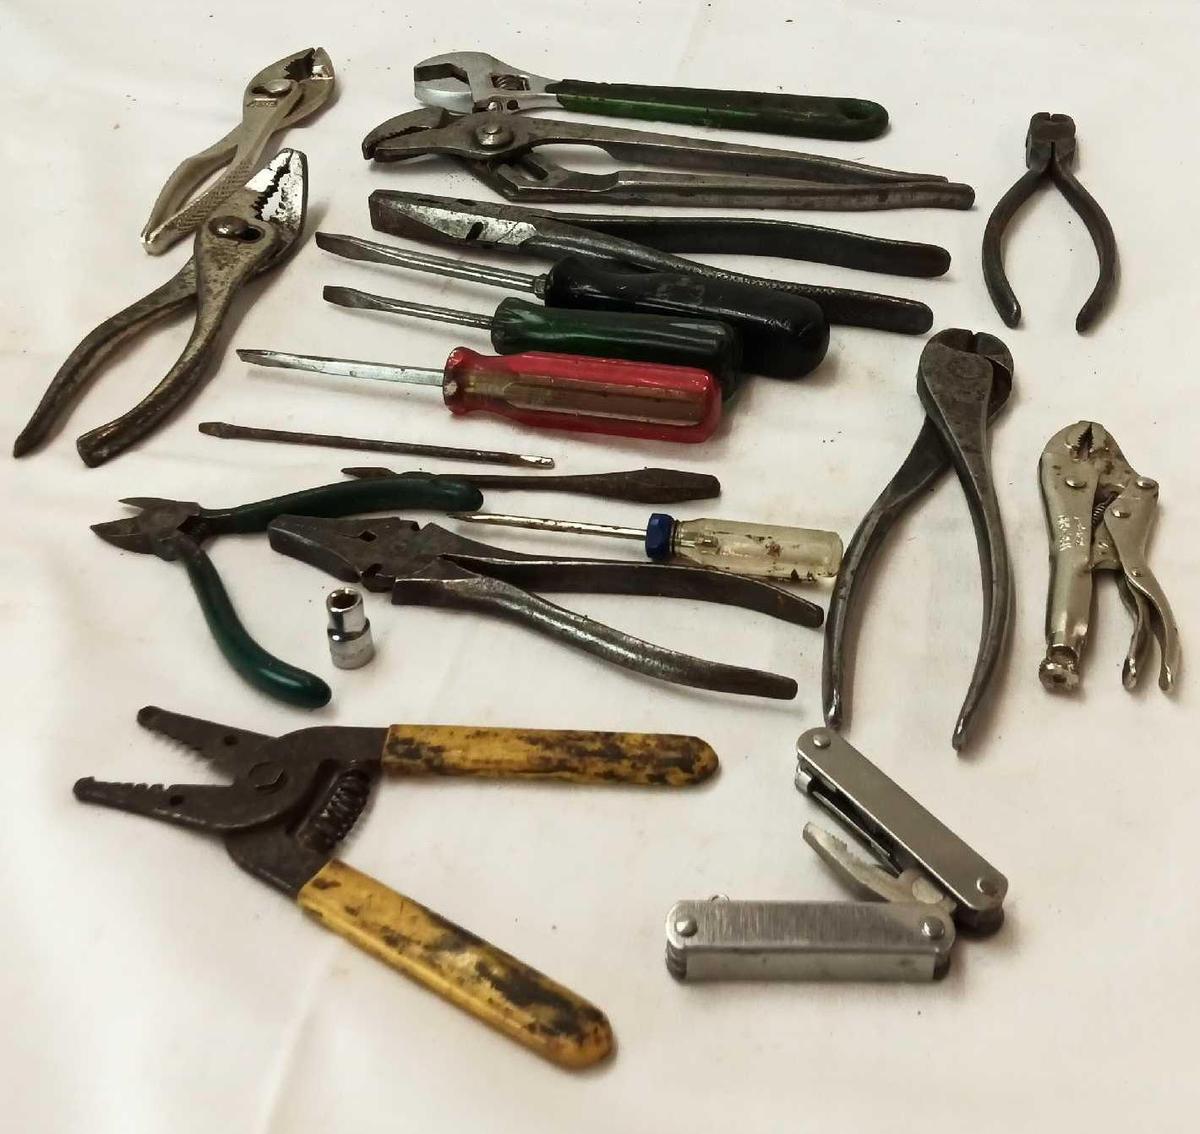 ASSORTED TOOLS LOT - WRENCHS, PLIERS, SCREW DRIVERS